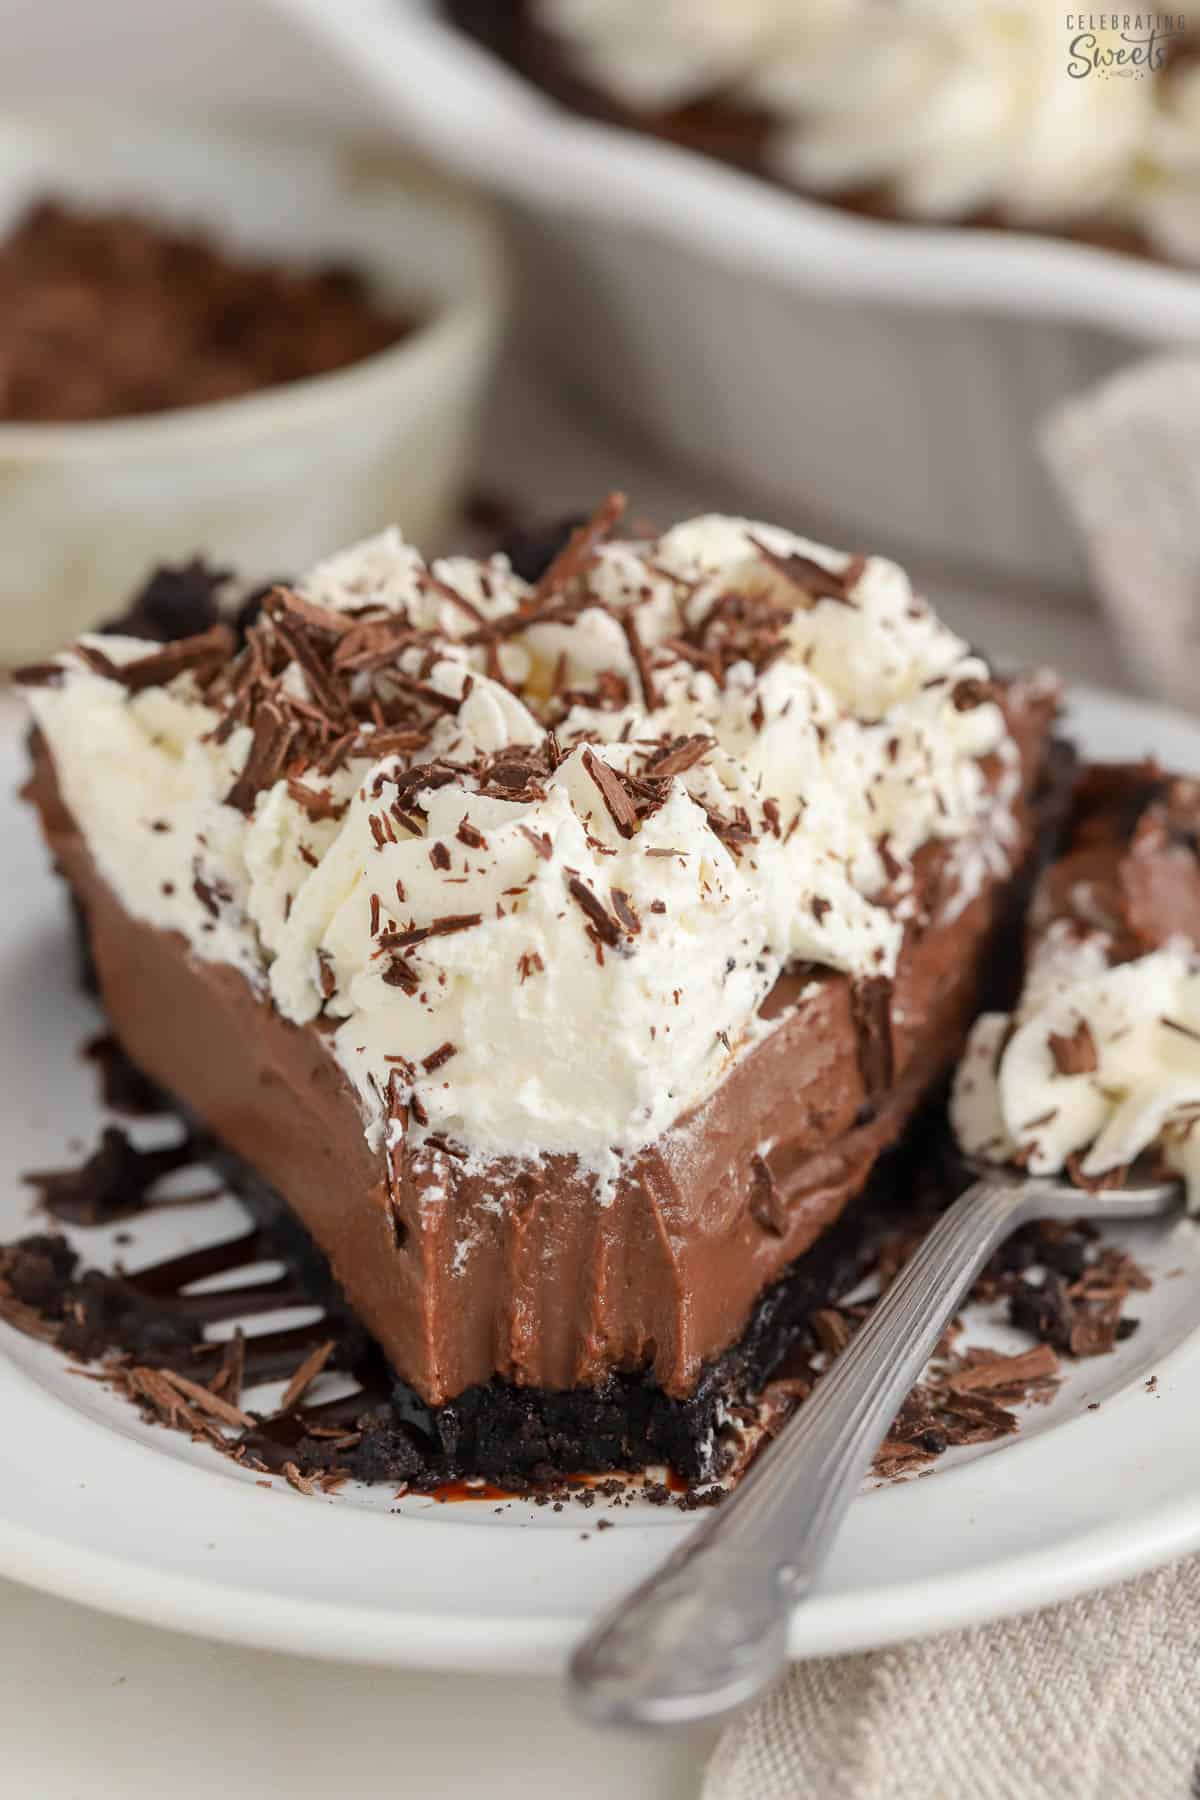 Slice of chocolate pie on a white plate topped with chocolate shavings.